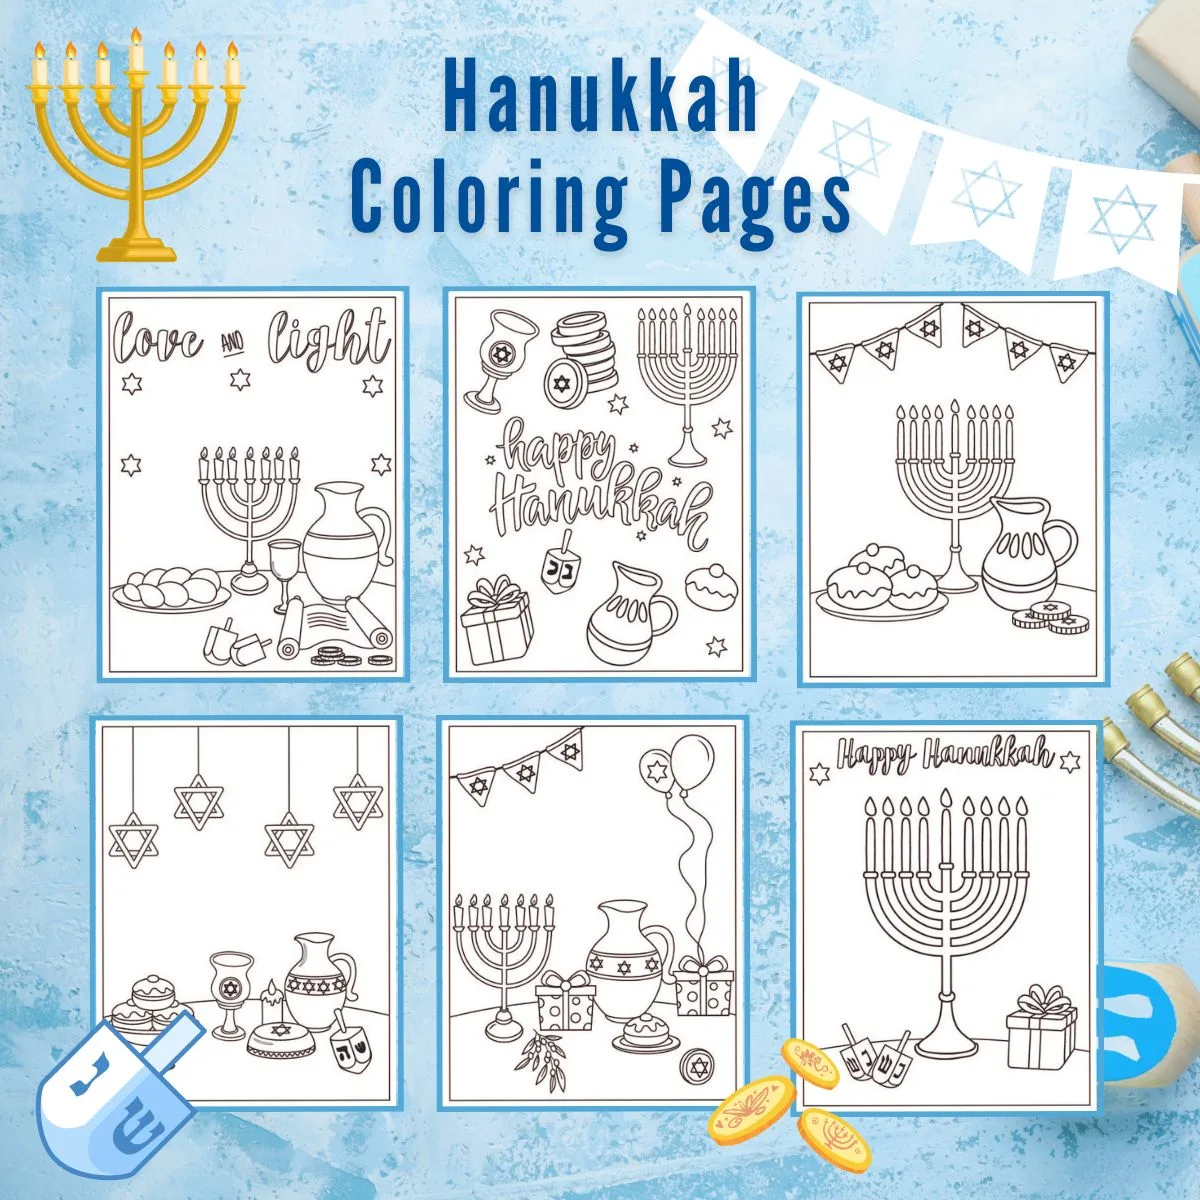 Graphic with text: Hanukkah Coloring Pages